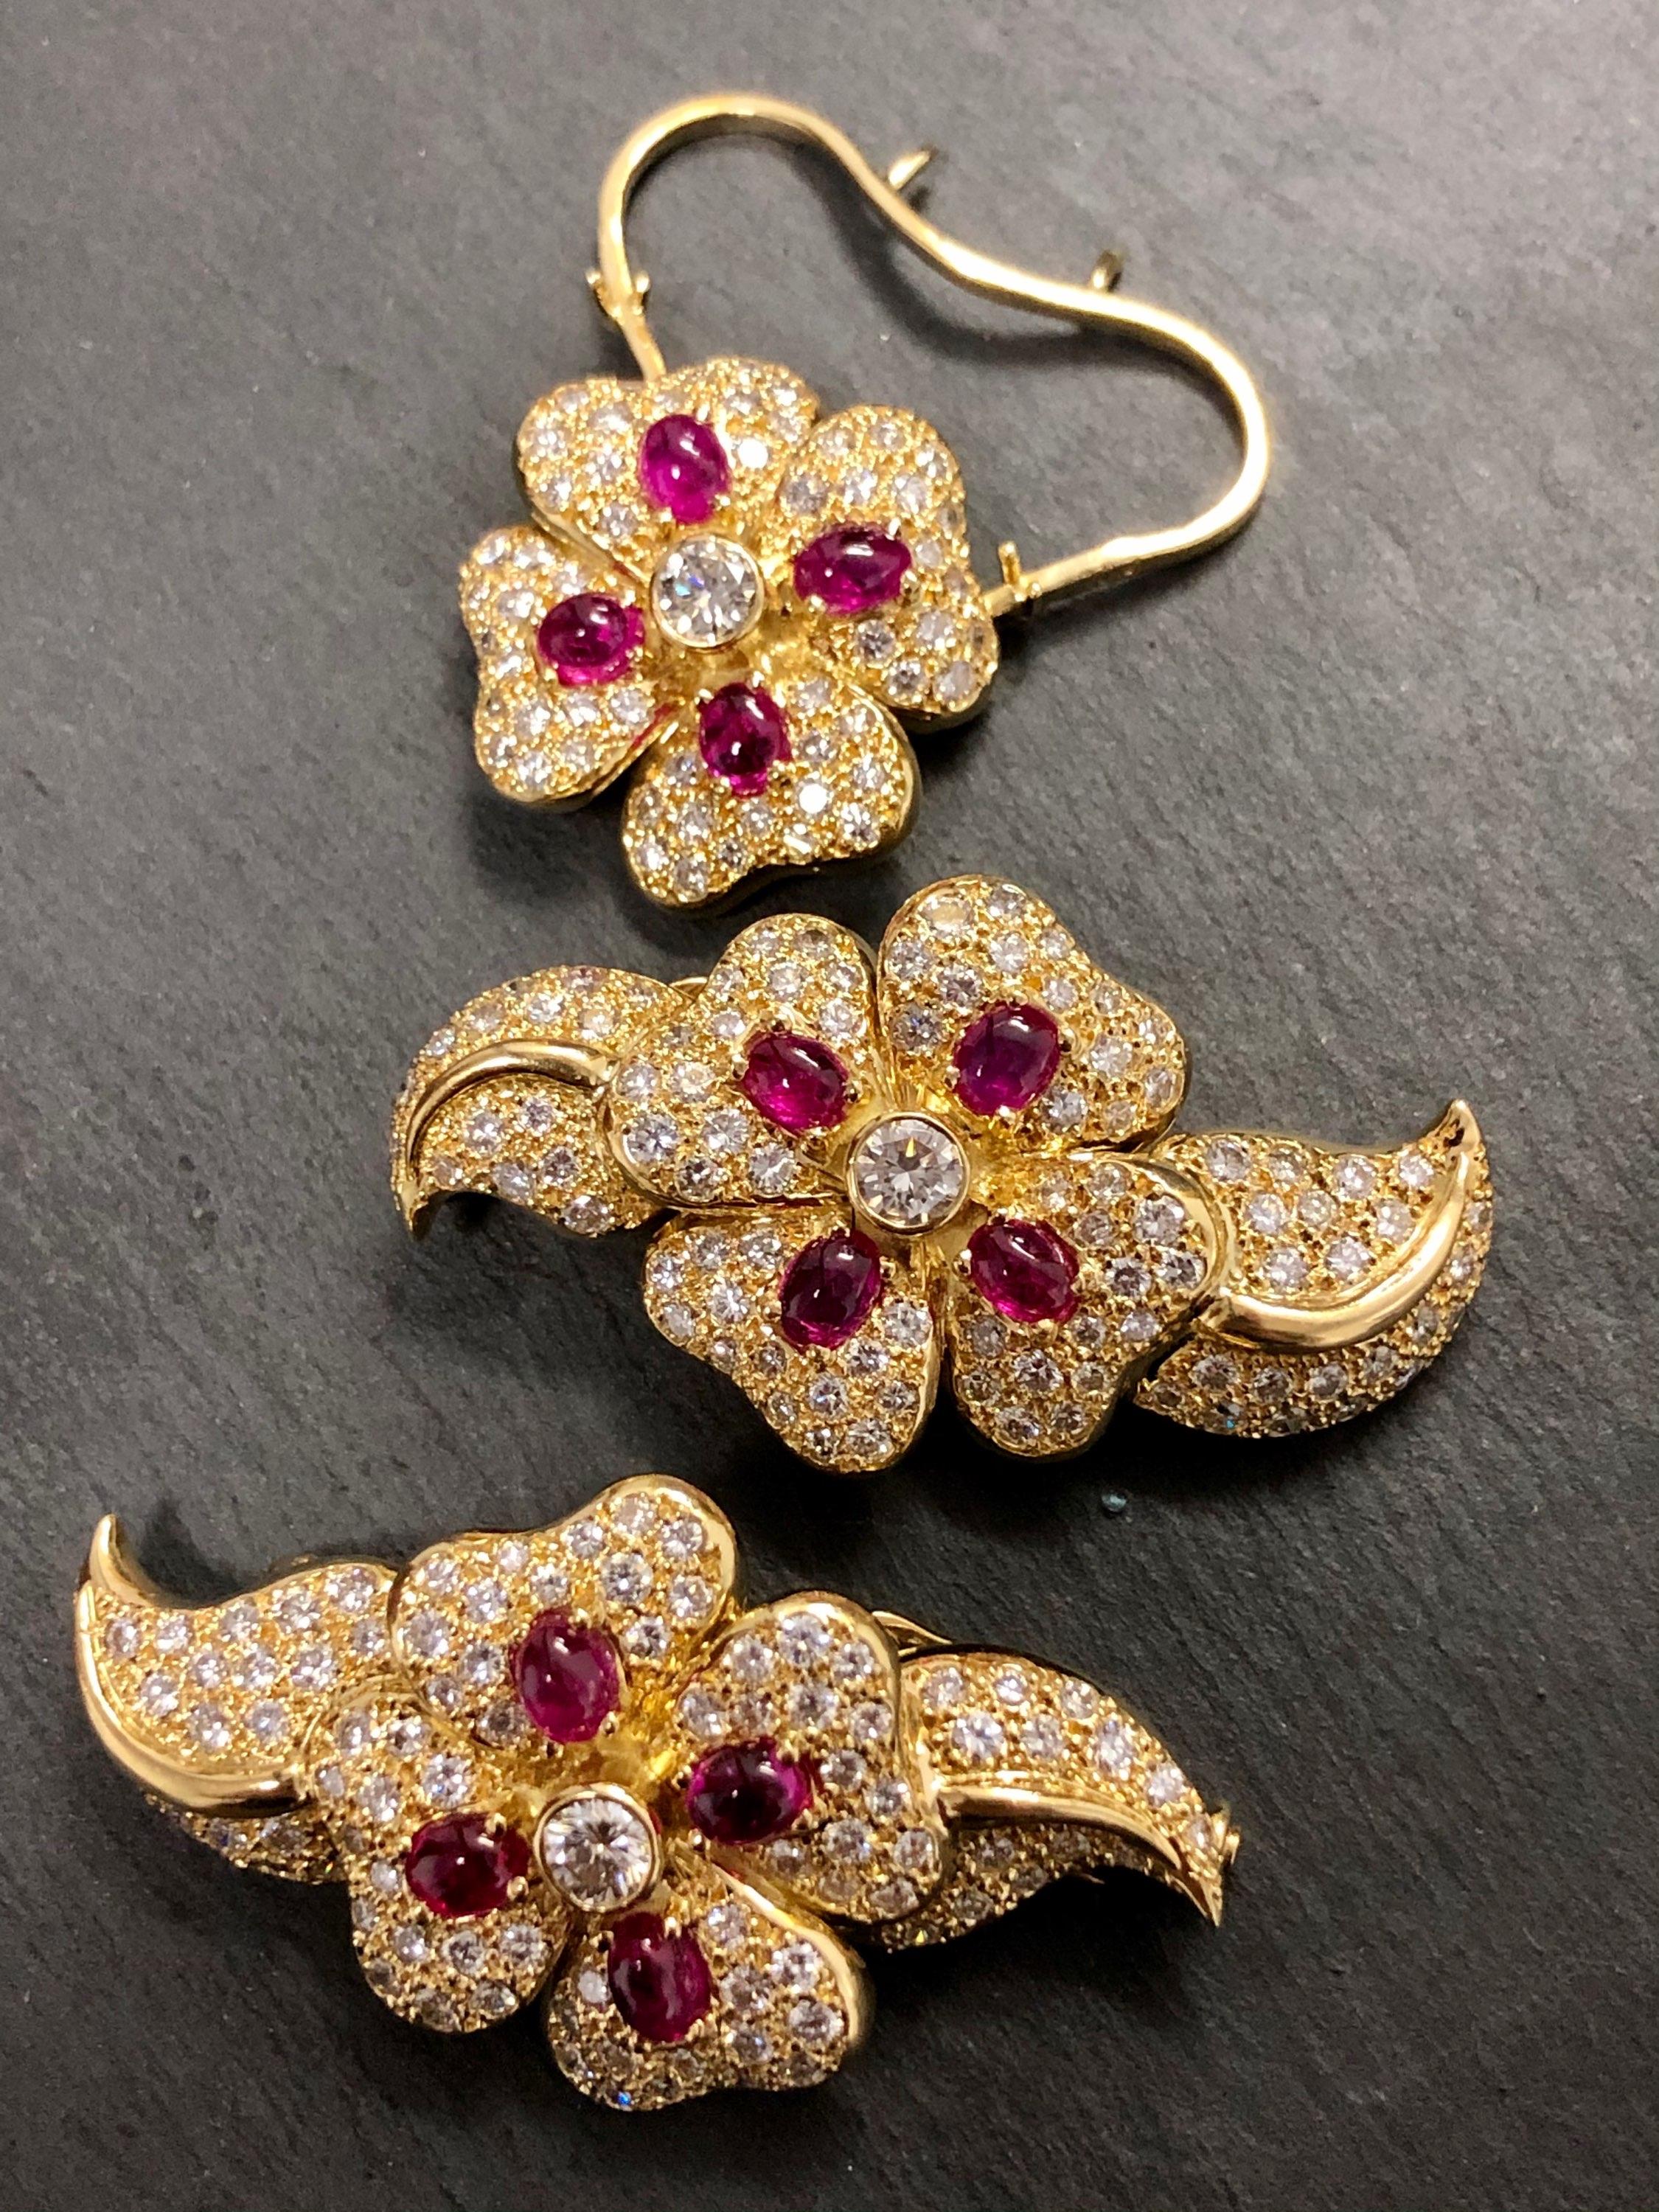 18K Diamond Cabochon Ruby Scatter Pin For Sale 1